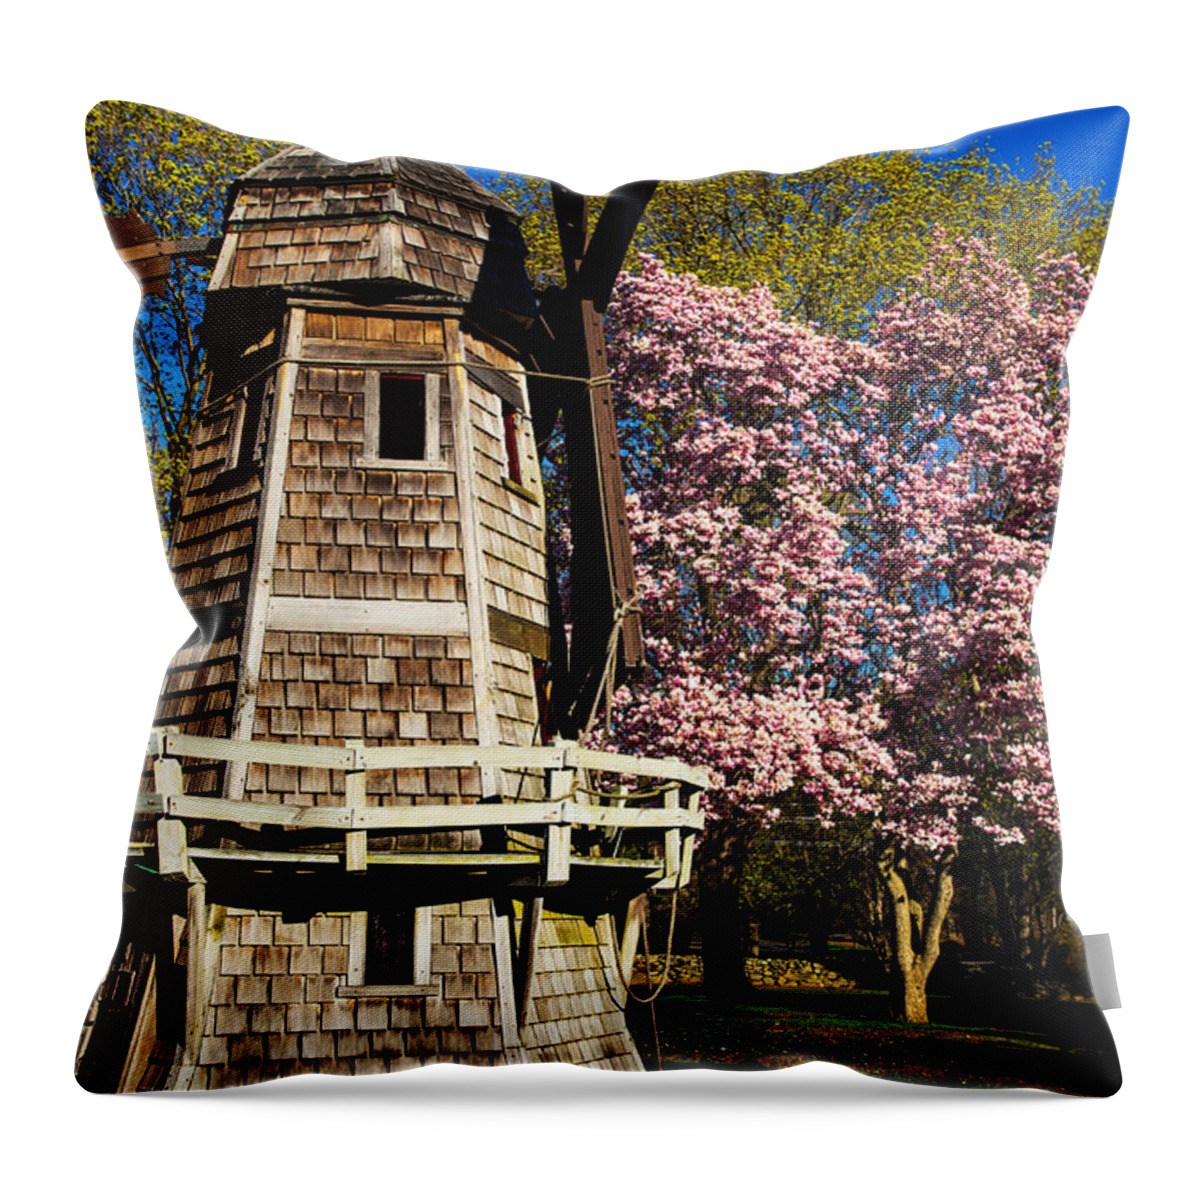 Spring Is Here Throw Pillow featuring the photograph Spring Is Here by Karol Livote